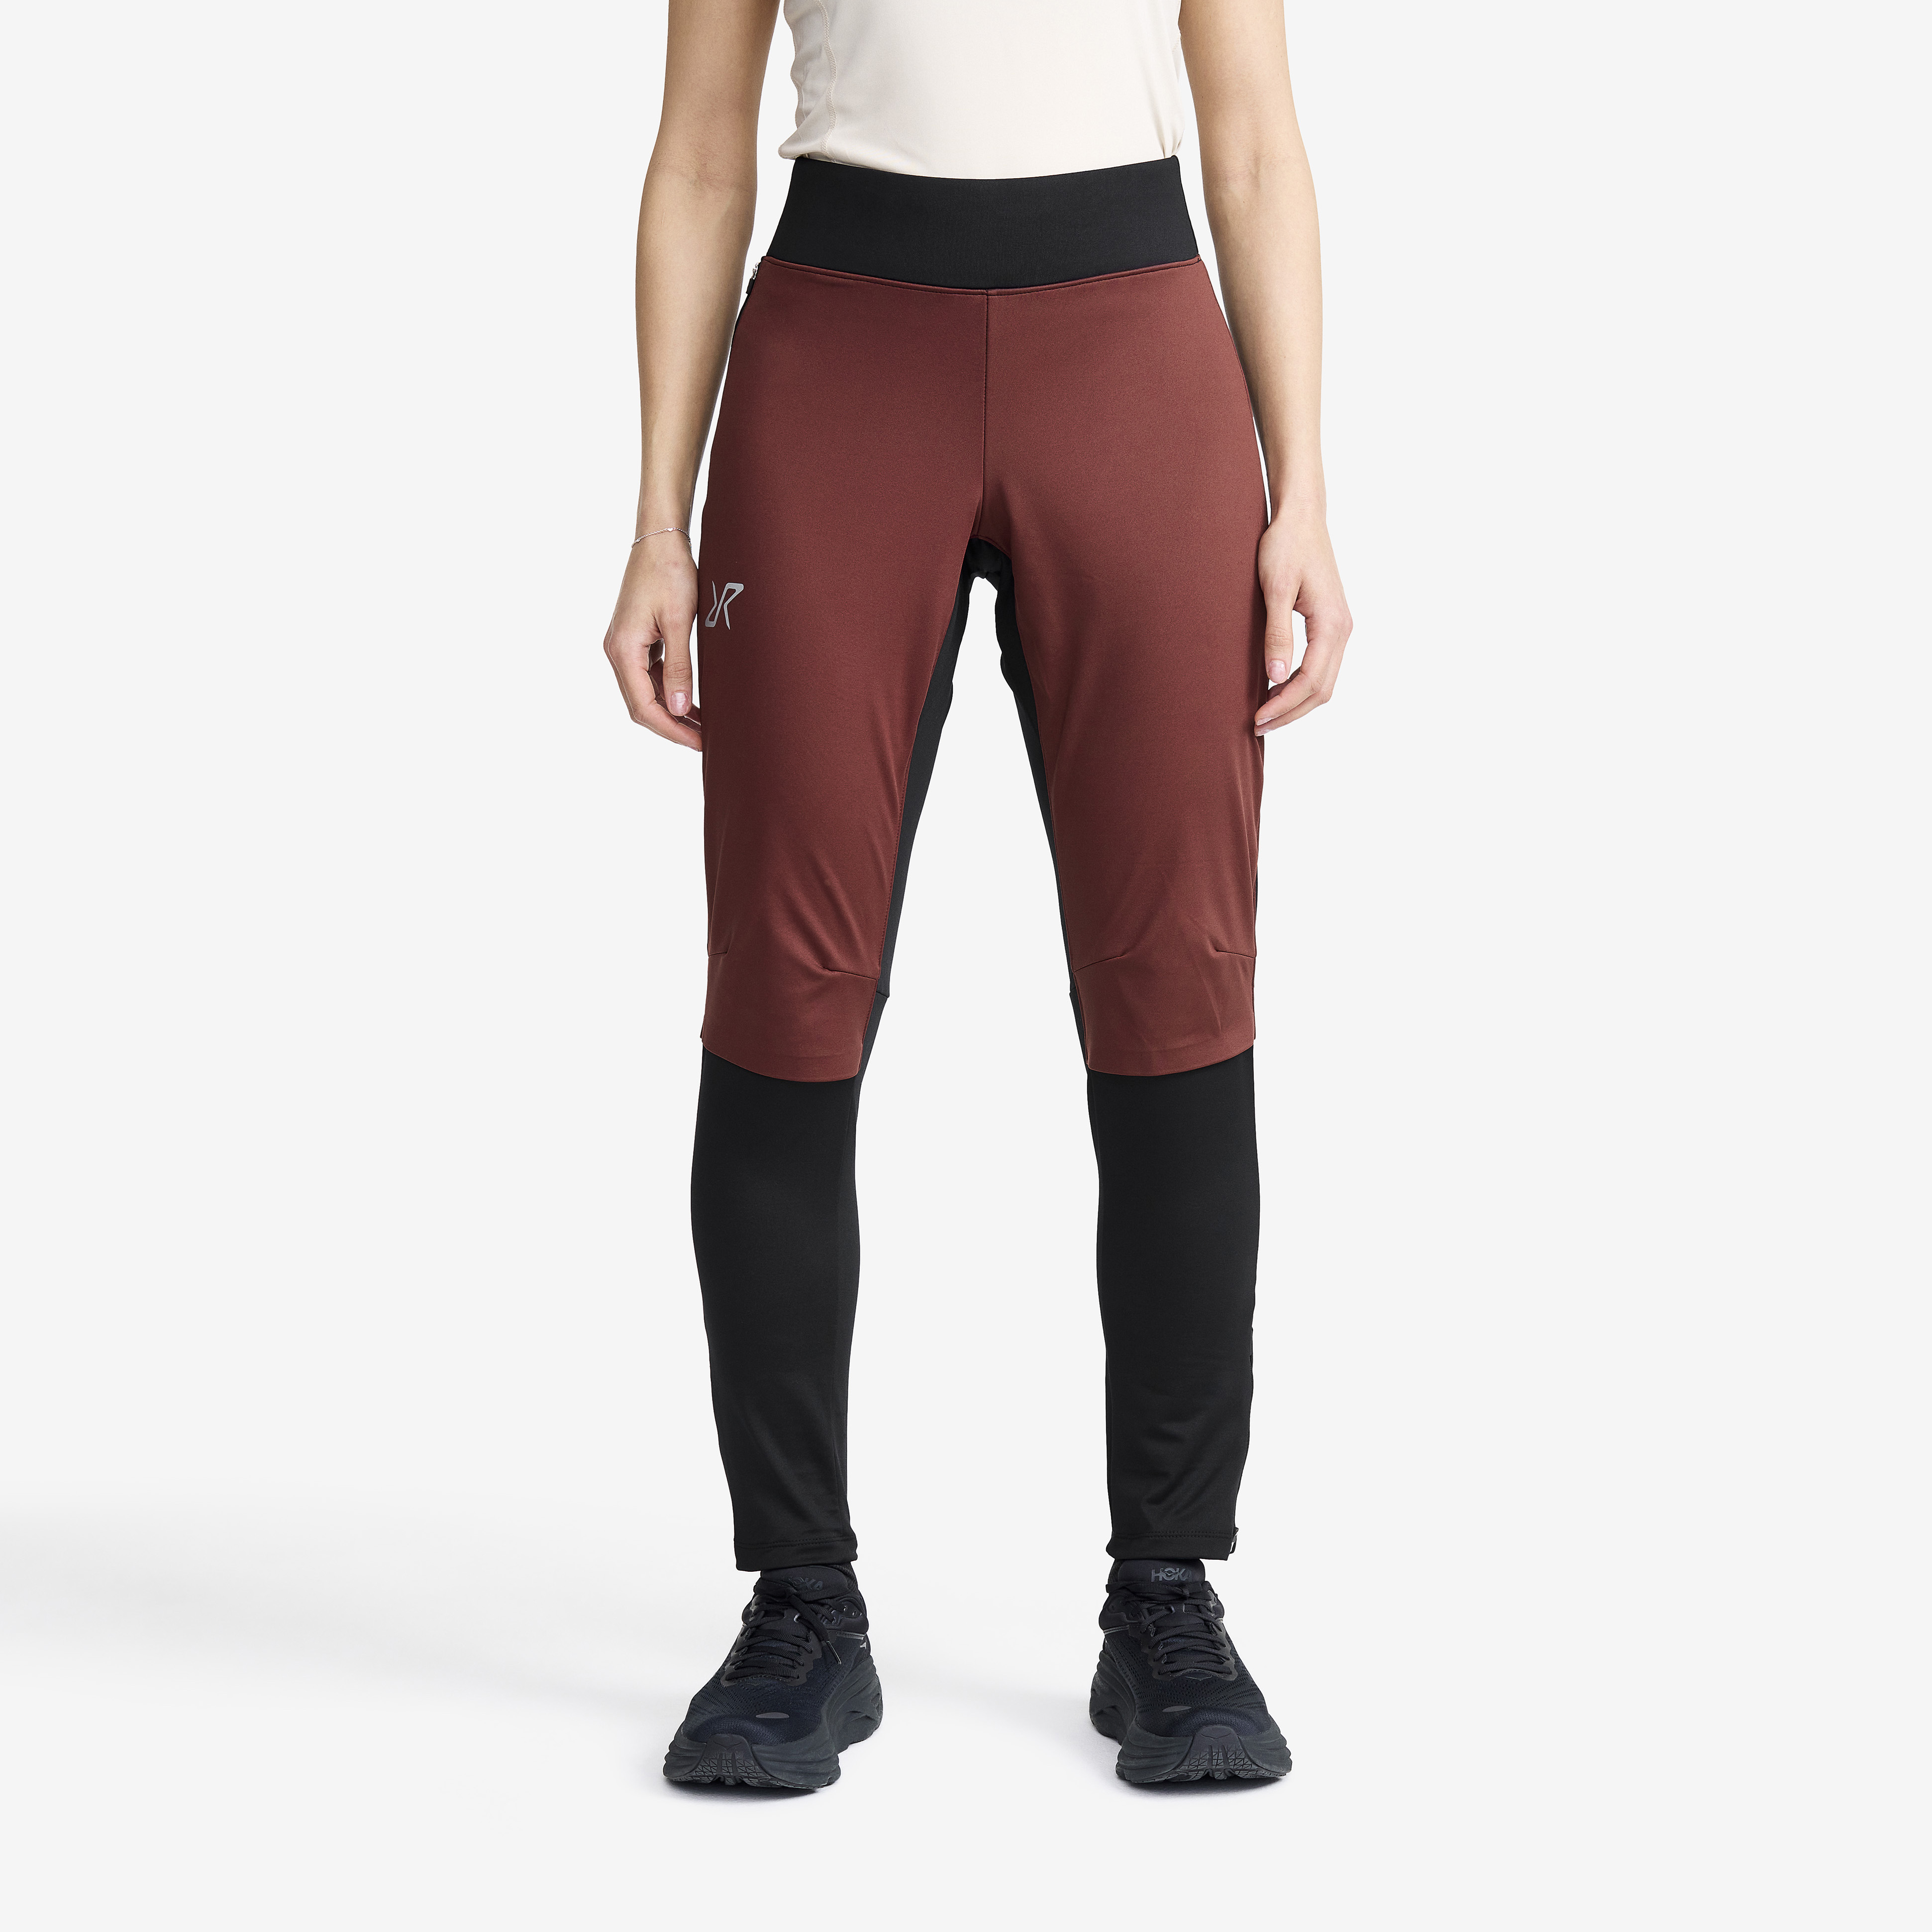 Pace Wind Tights – Dam – Andorra Storlek:M – Outdoor Tights